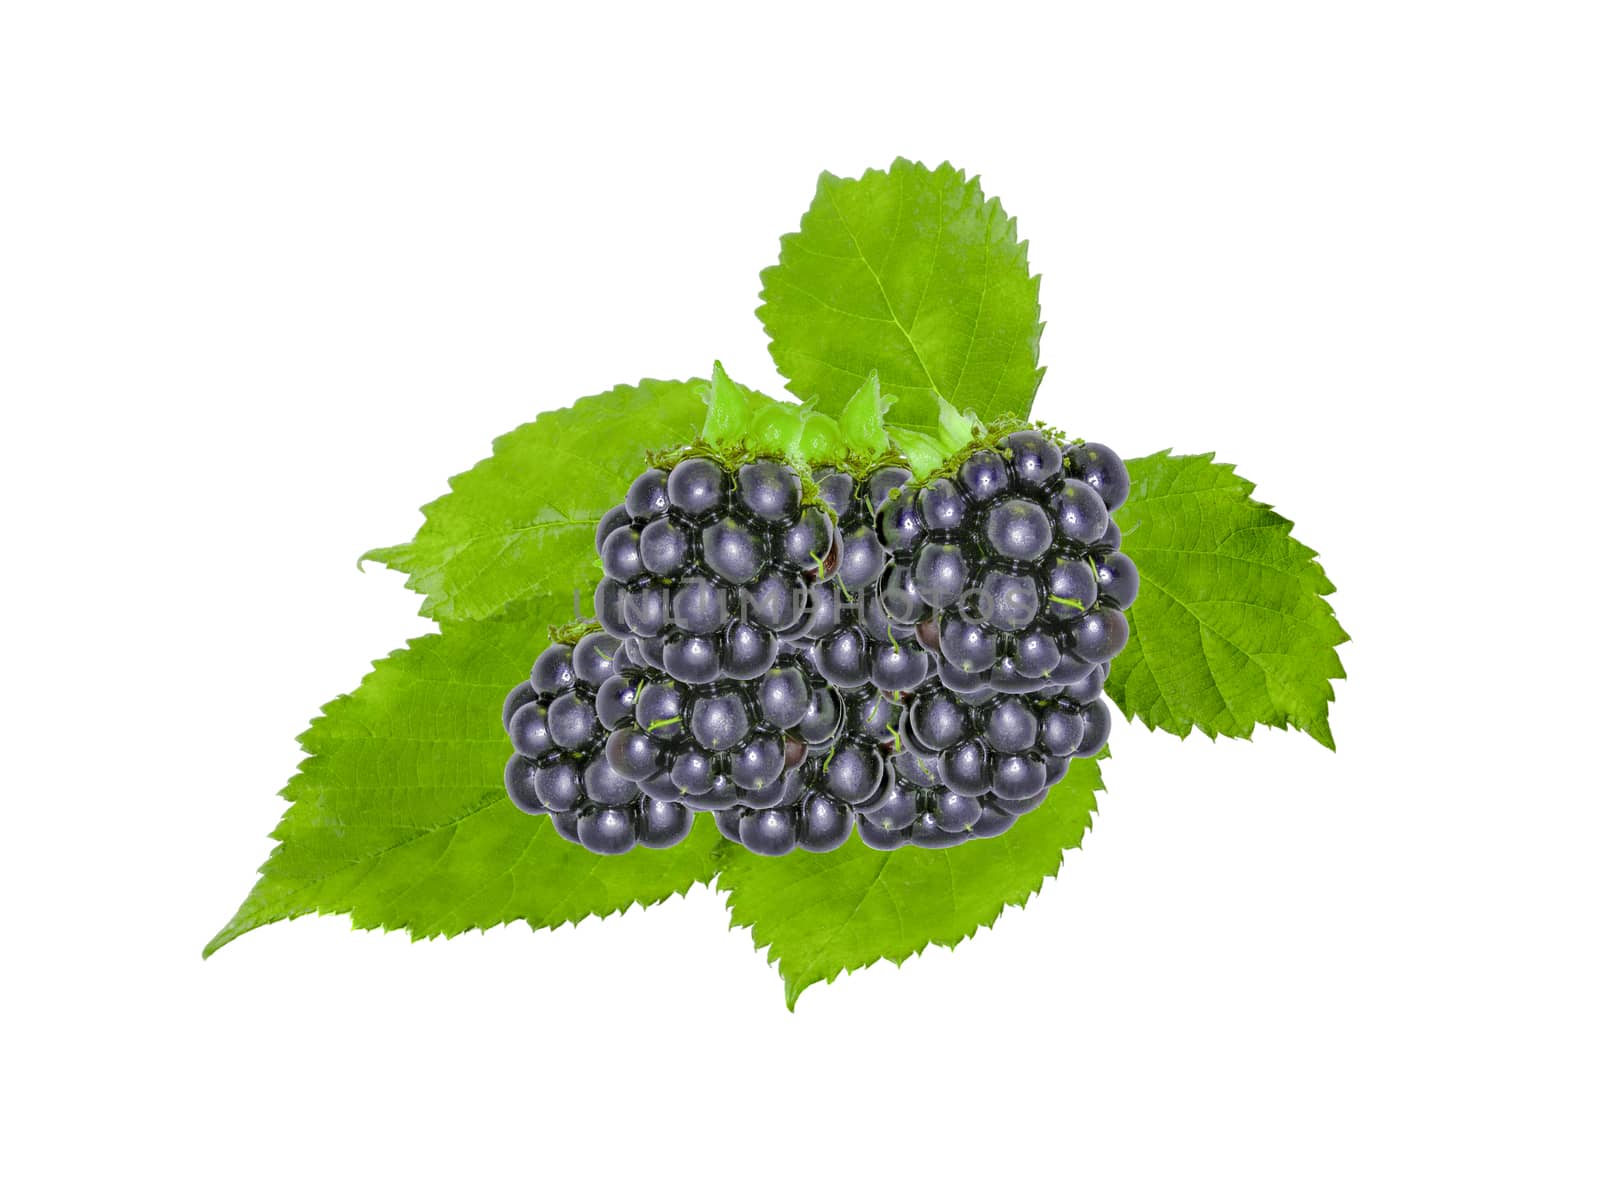 Blackberry With Green  Leaves on white Background by gstalker